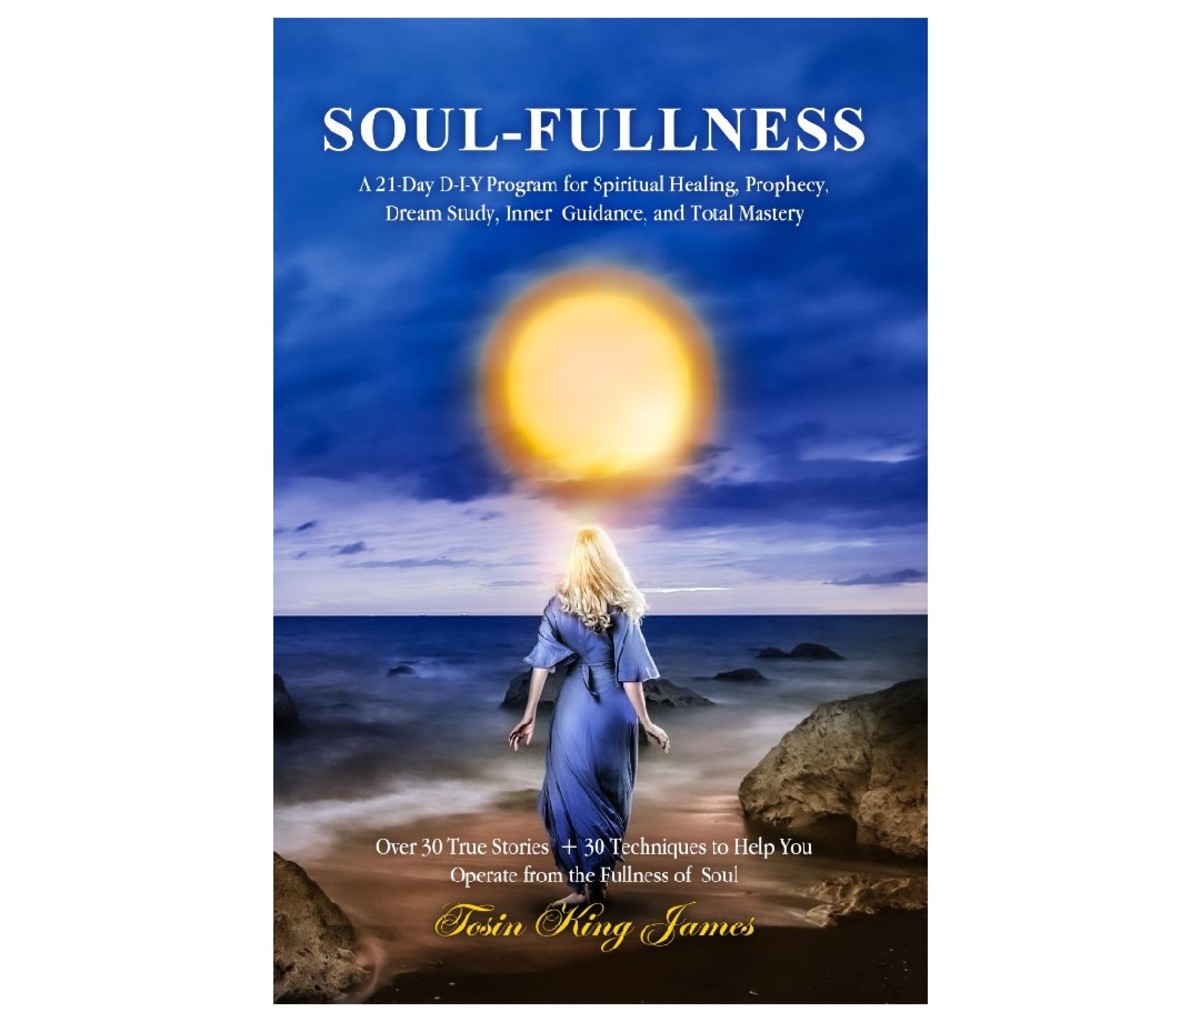 Abundance of Soul, a 21-Day Do-It-Yourself Program of Spiritual Healing, Prophecy, Dream Study, Inner Guidance, and Total Mastery by Tosin King James